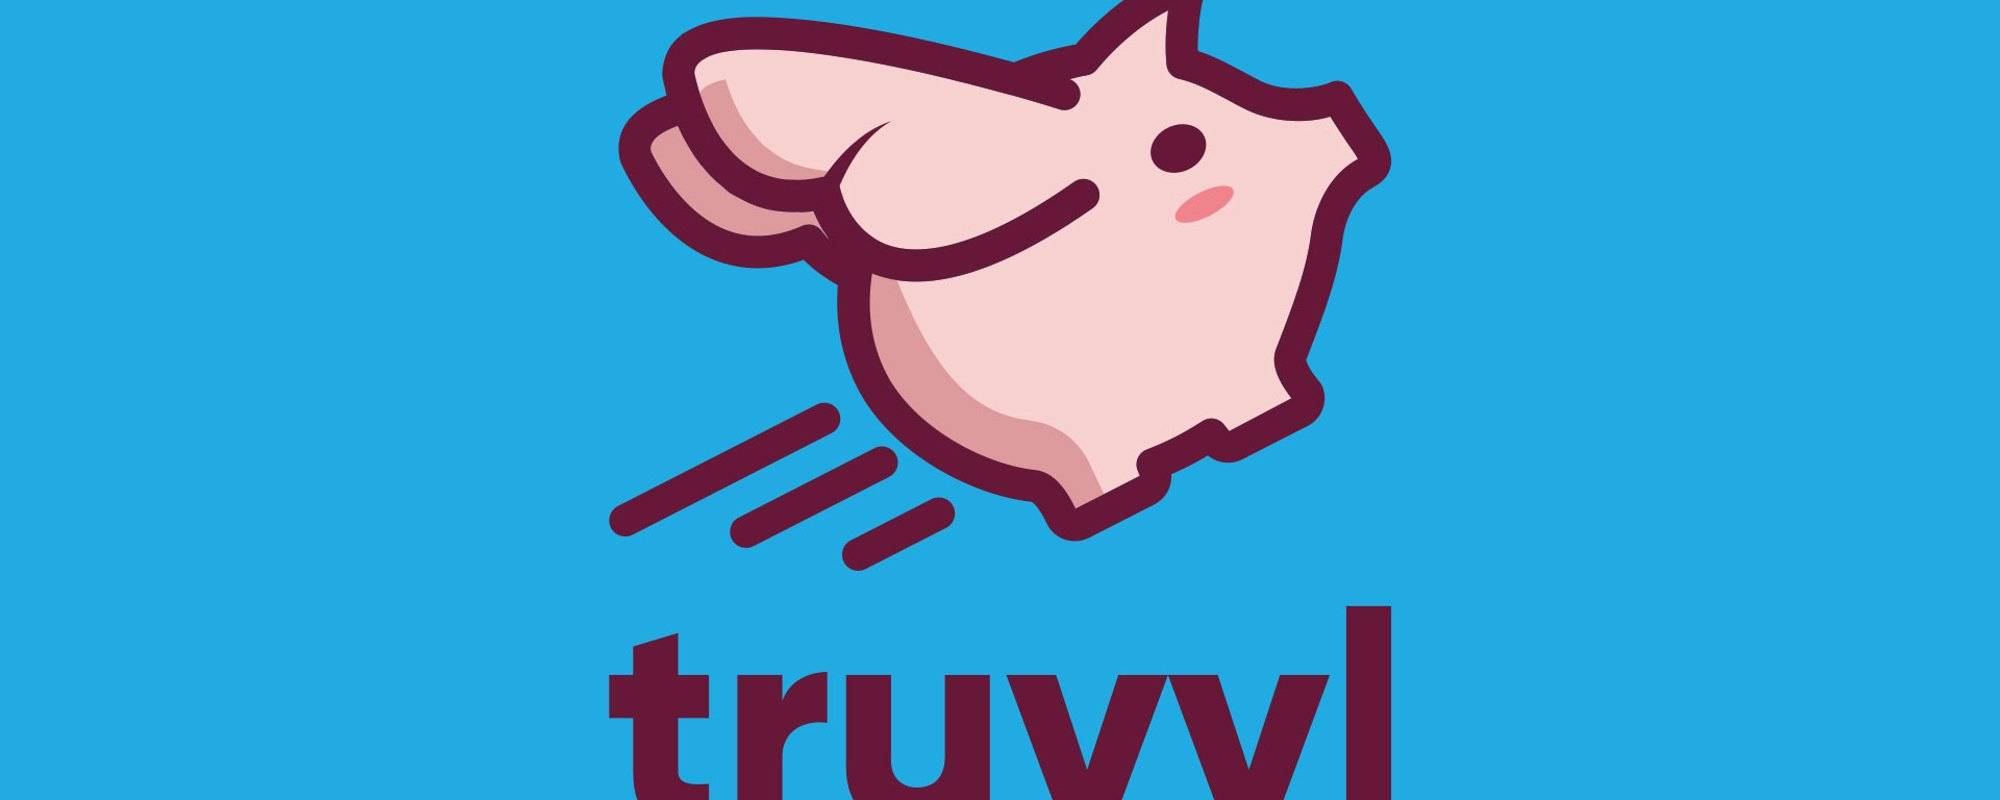 Introducing truvvl: An app for (travel) stories. Now available on Android & iOS!